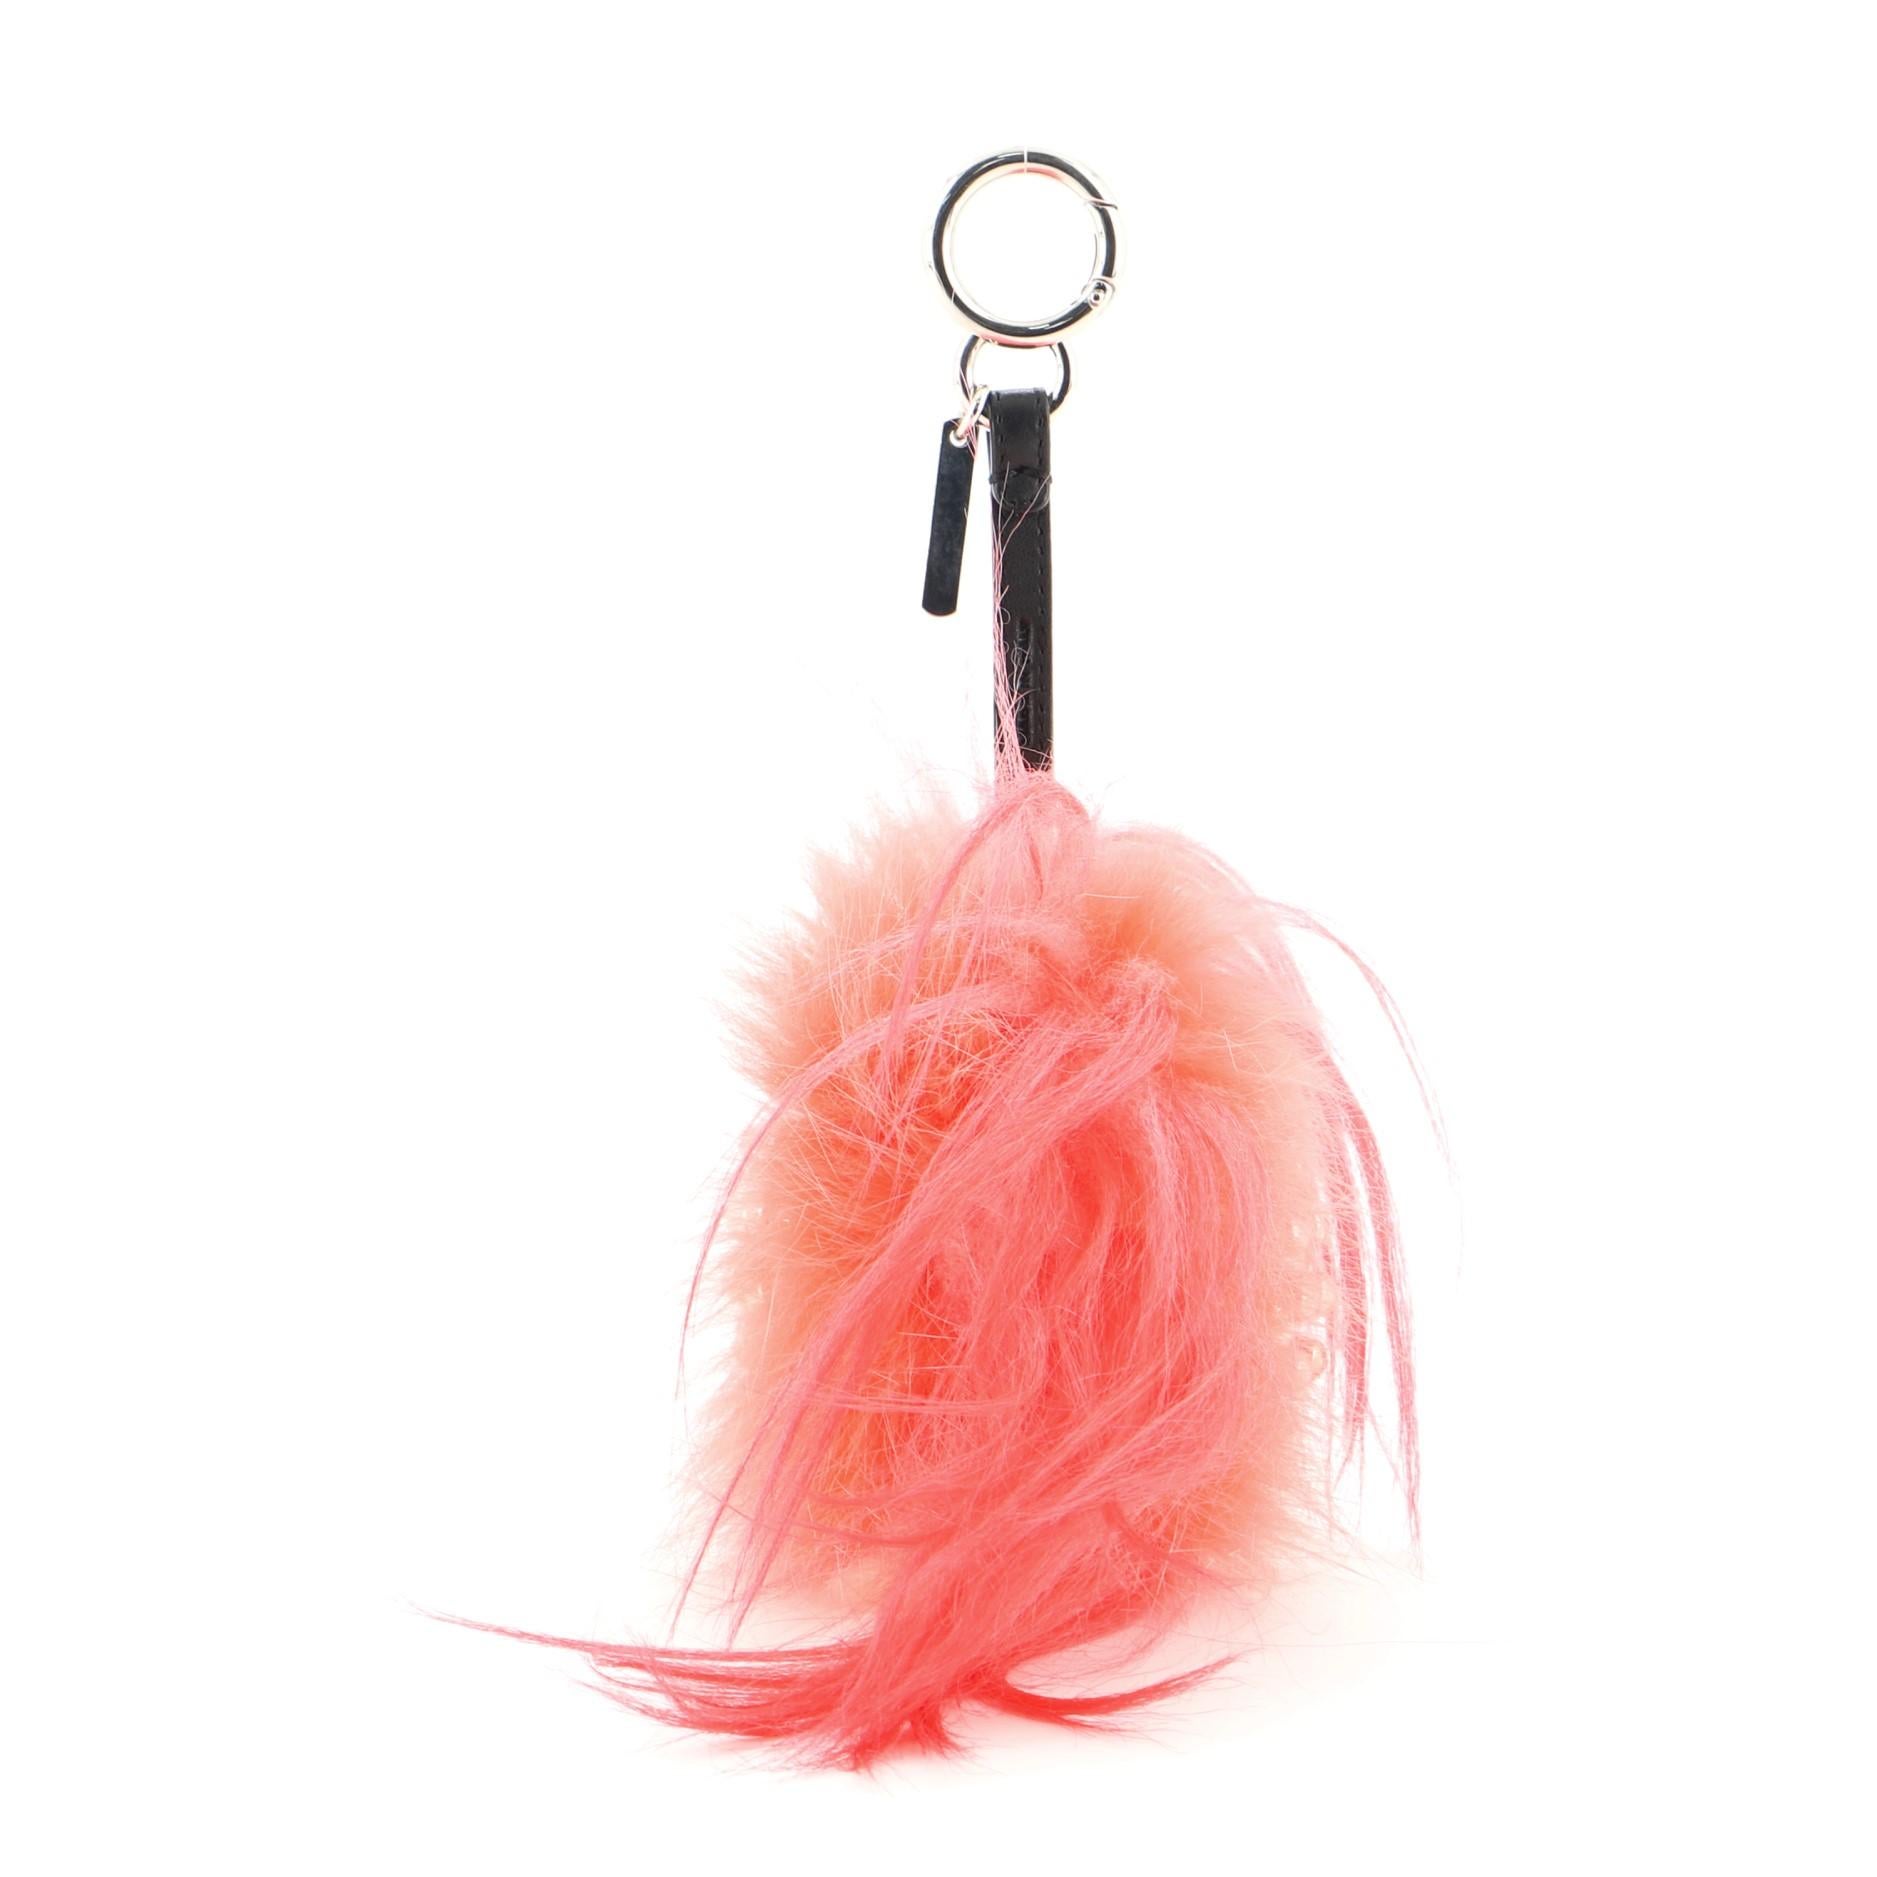 Fendi Punkito Karlito Bag Charm Studded Leather with Fur
Neutral, Pink

Condition Details: Minor wear and small glue stain on exterior, scratches and slight tarnish on hardware.

51879MSC

Height 4.5